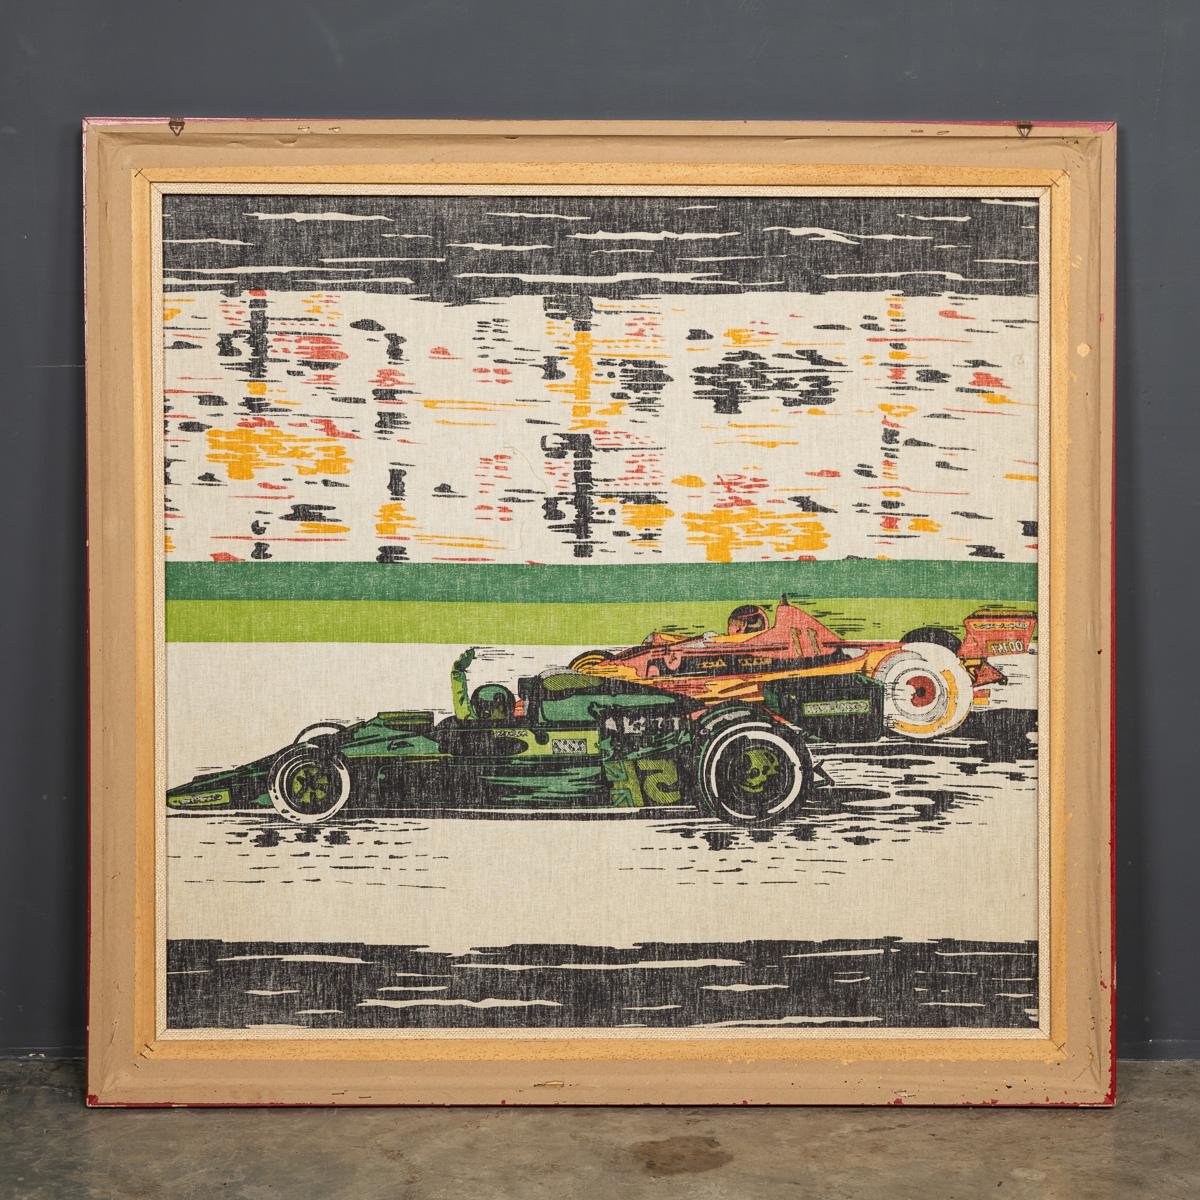 Unknown 20th Century Silk Screen Print of Racing F1 Cars on Track Poster, c.1970